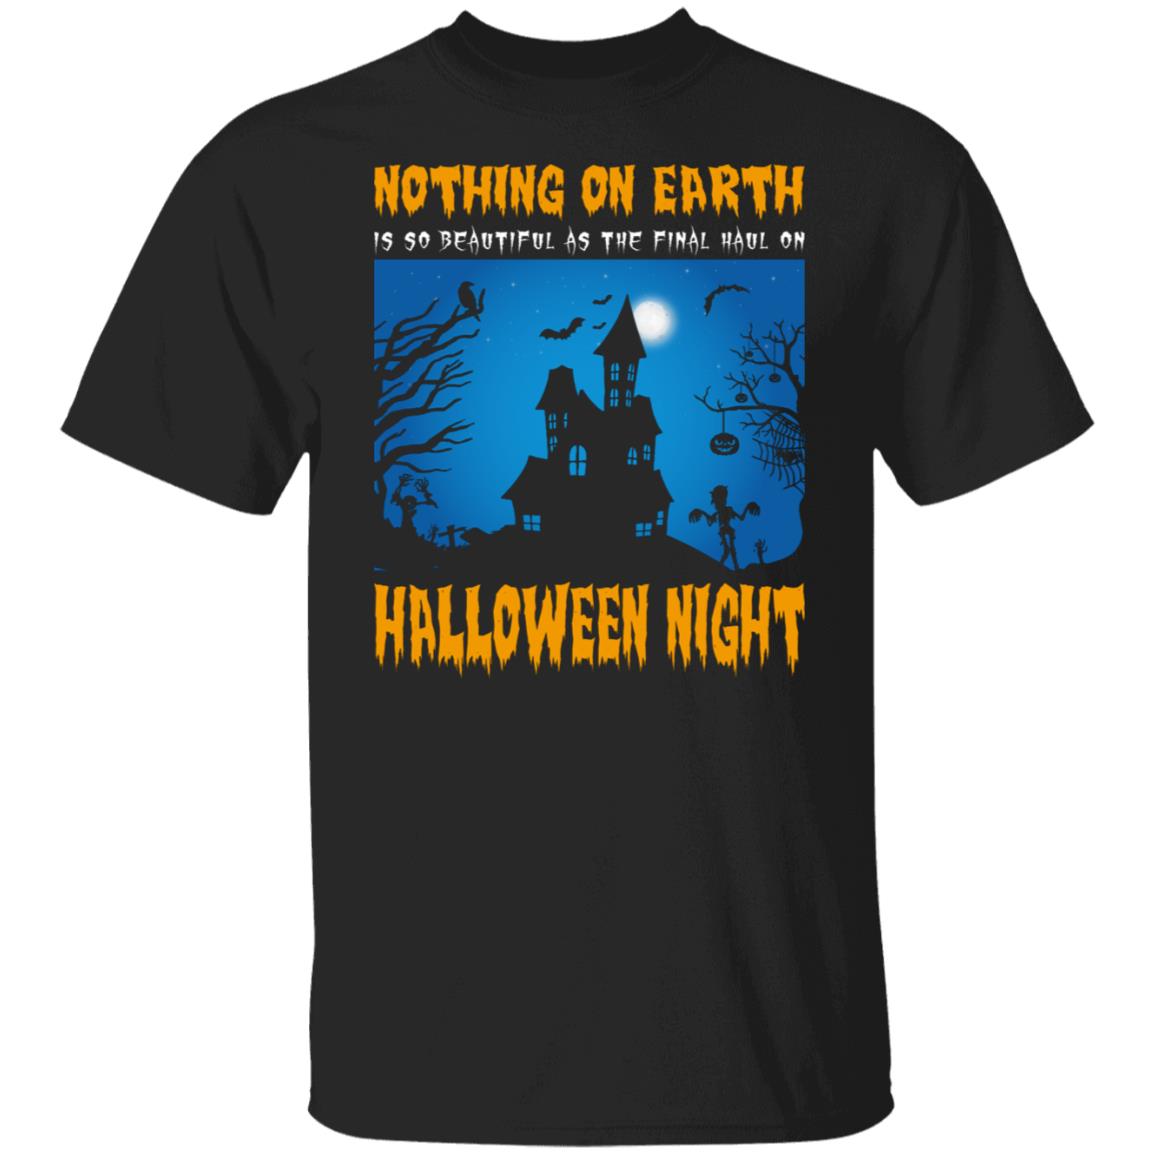 Nothing on Earth is So Beautiful As The Final Haul on Halloween Night Shirt